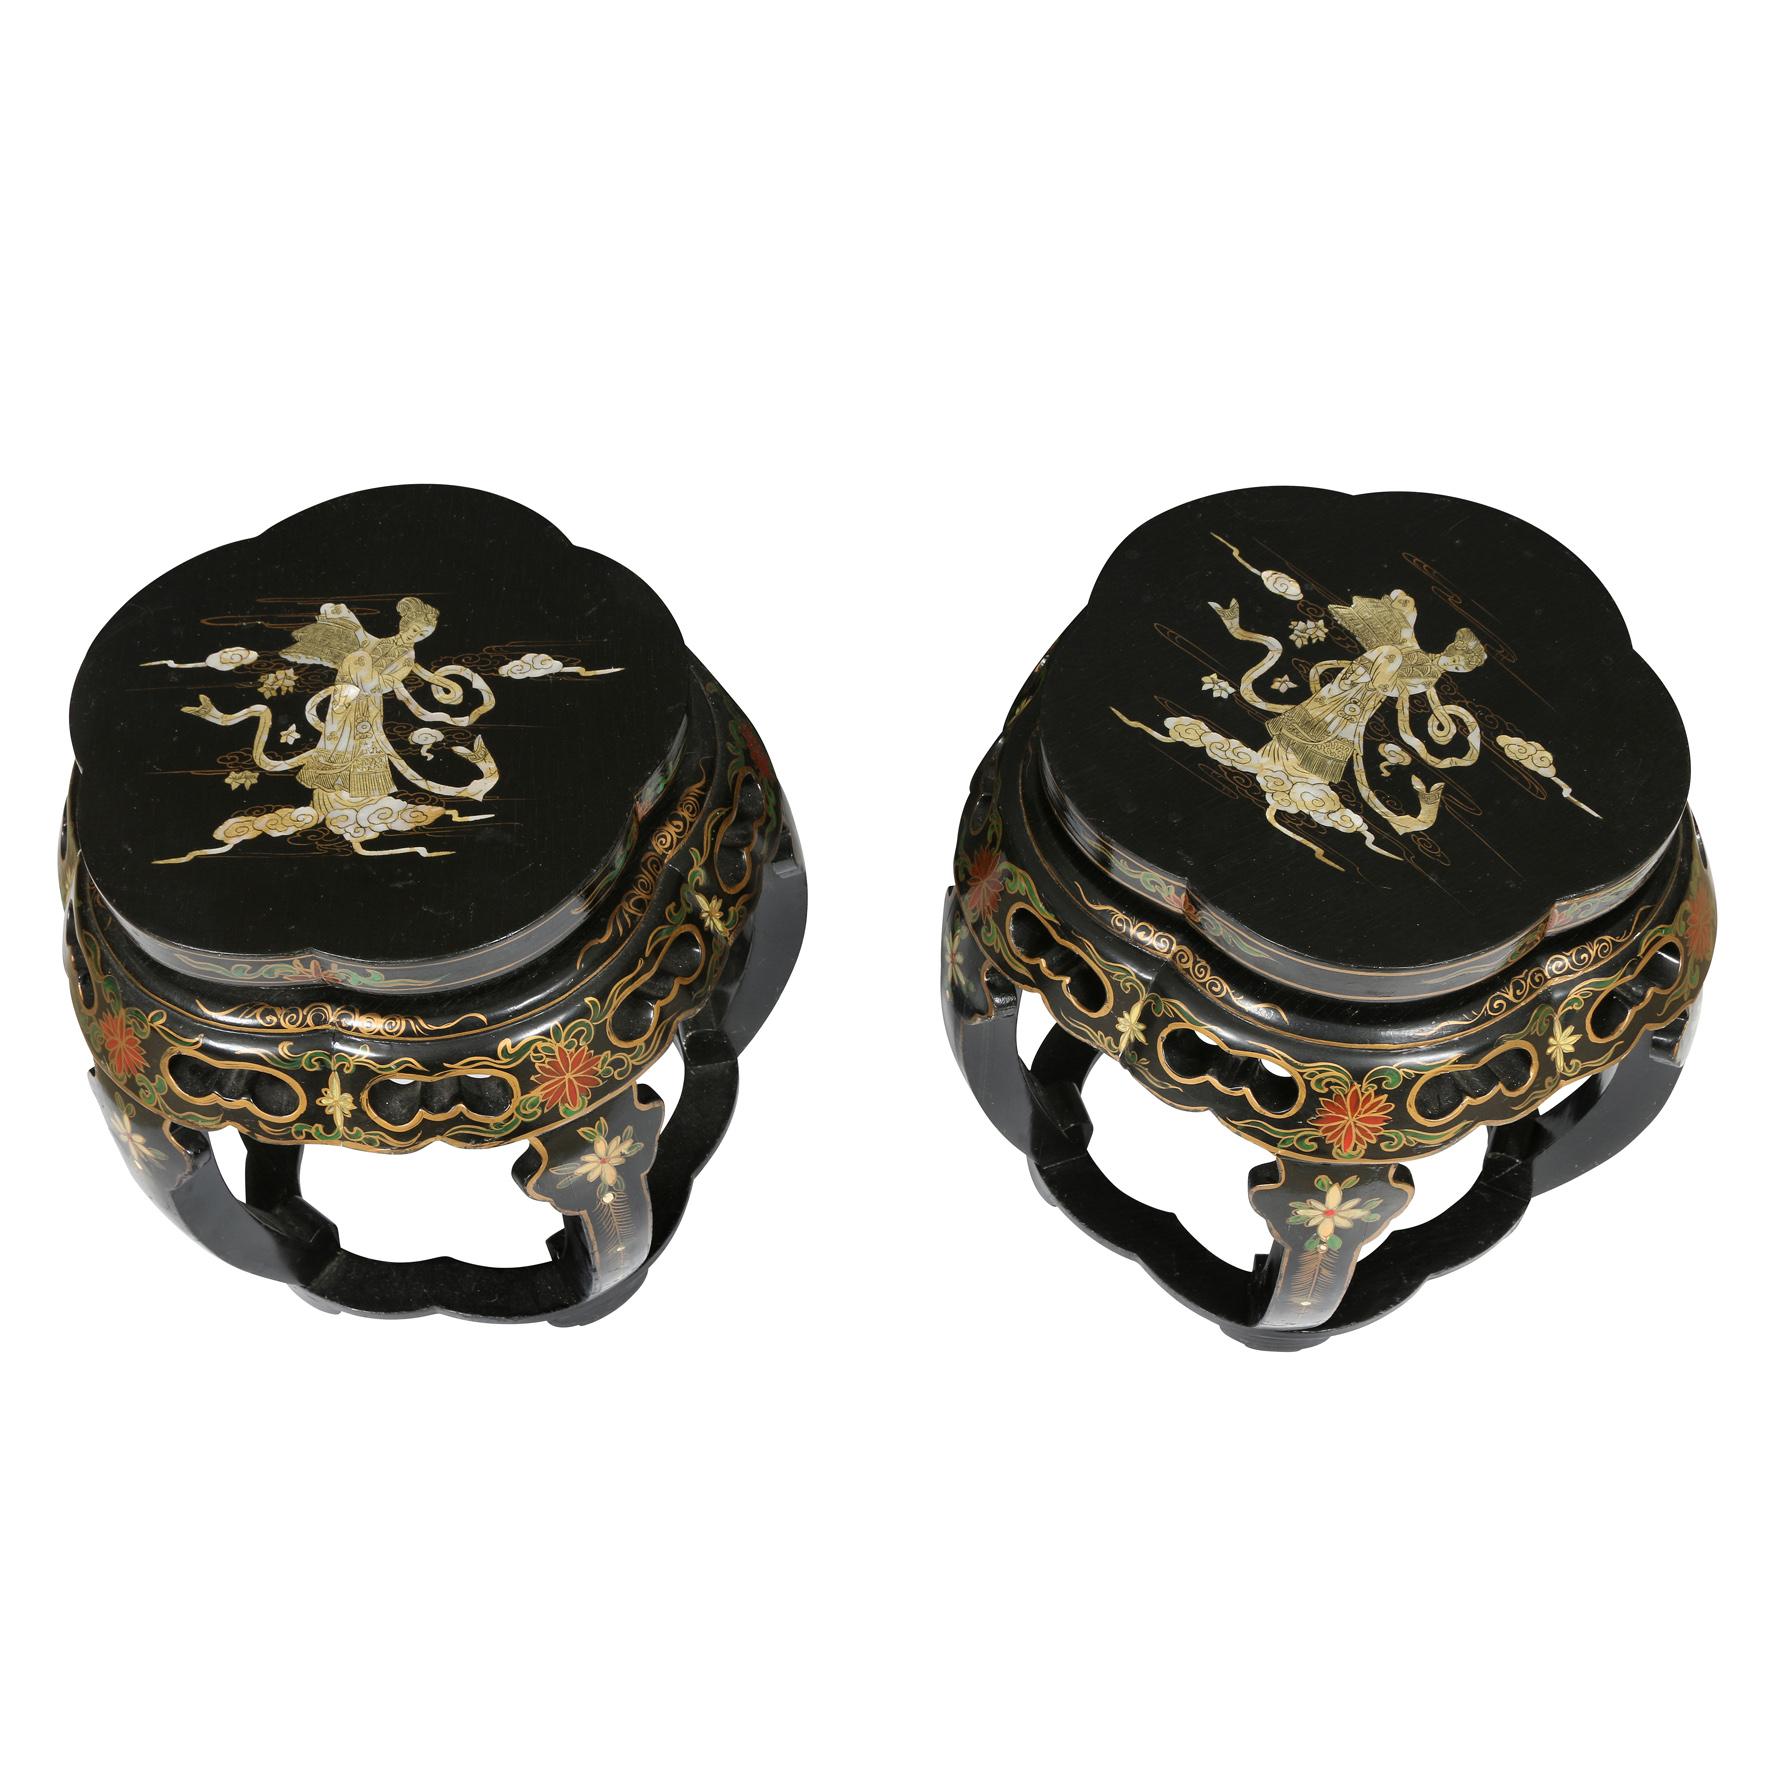 A pair of black lacquered mother of pearl inlay tabourets featuring a figure on top and floral motif decorating the sides